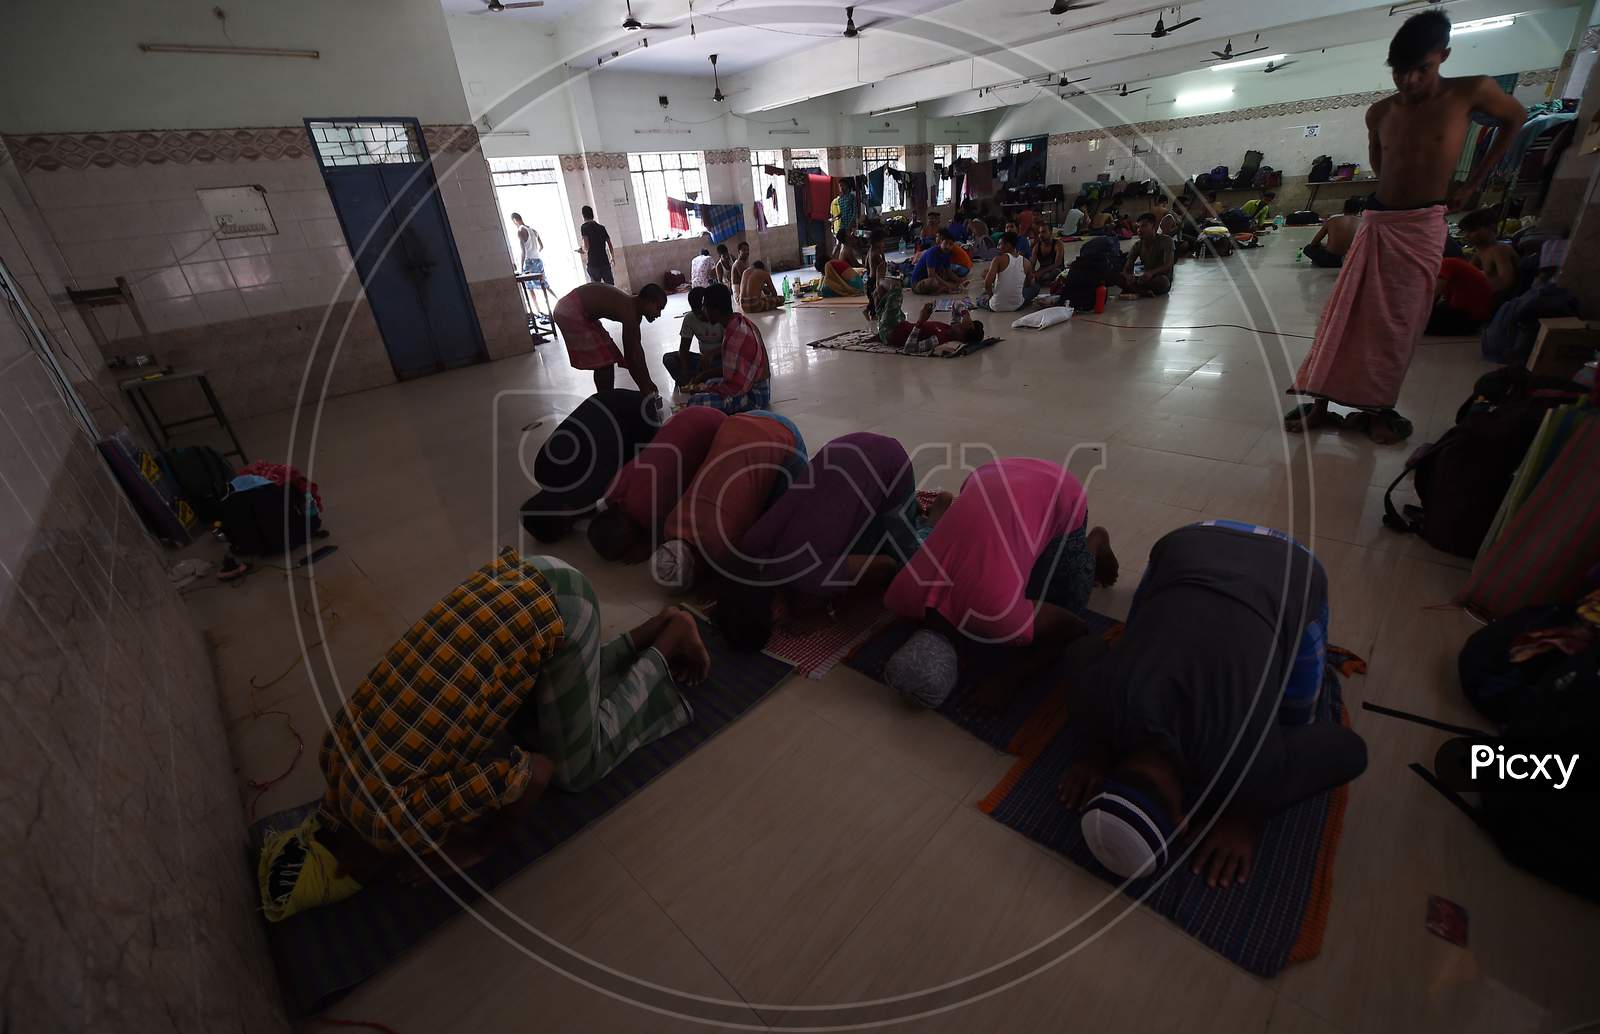  Migrant Workers Offer Namaz At Their Camp During A Government-Imposed Nationwide Lockdown As A Preventive Measure Against The Covid-19 Coronavirus, In Chennai